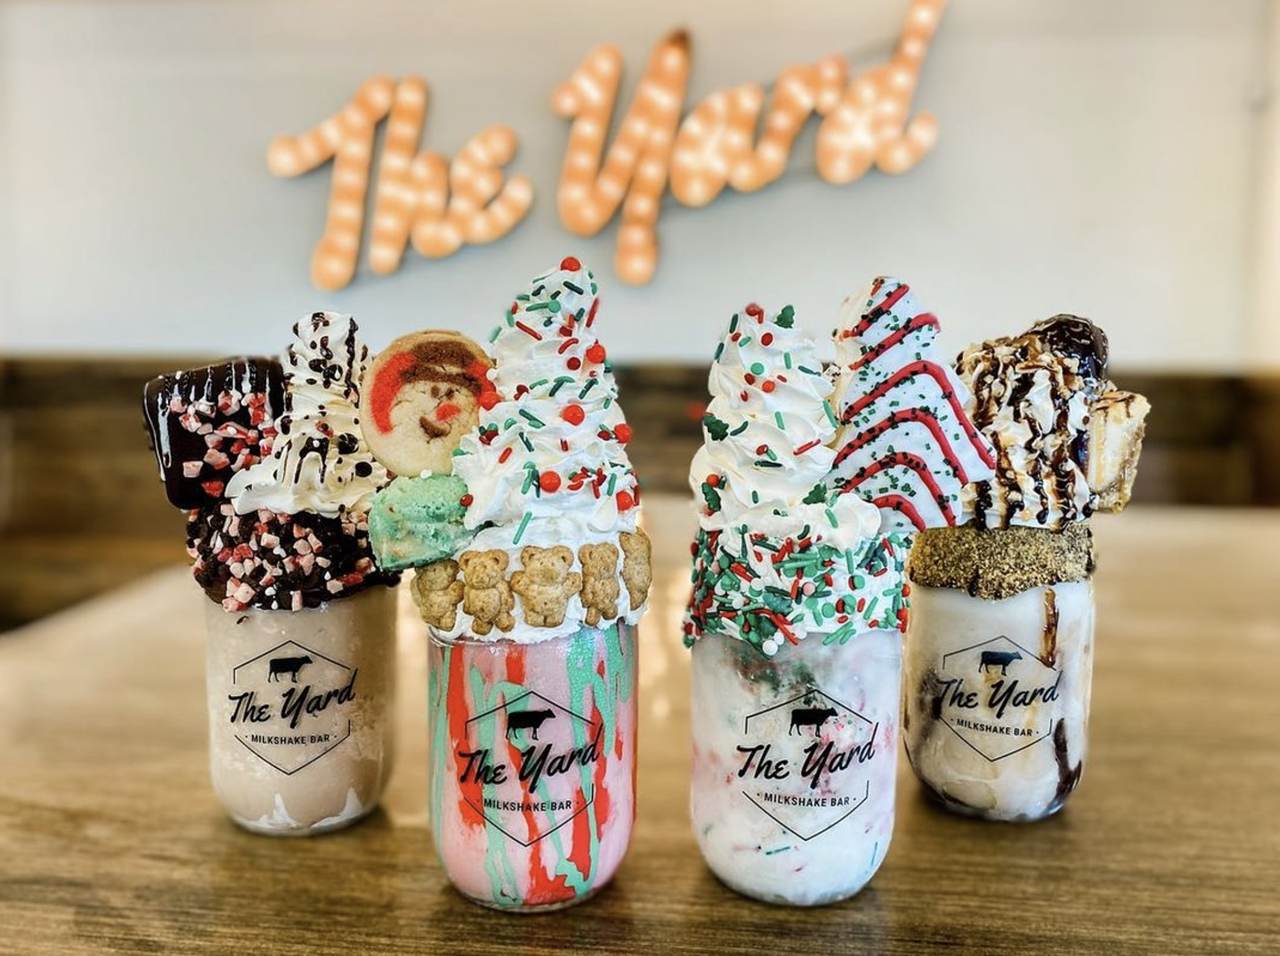 Yard Milkshake Bar
3301 S Dale Mabry Hwy., Tampa
The Yard was featured on “Shark Tank” back in 2019, striking a deal that made opening more franchise locations possible, but ownership hasn't stopped there. The concept has plenty of other whacky creations on deck, including edible cookie dough pops, floats and scoop options. You can also create pretty much anything with the Yard’s 30-plus ice cream offerings and toppings.